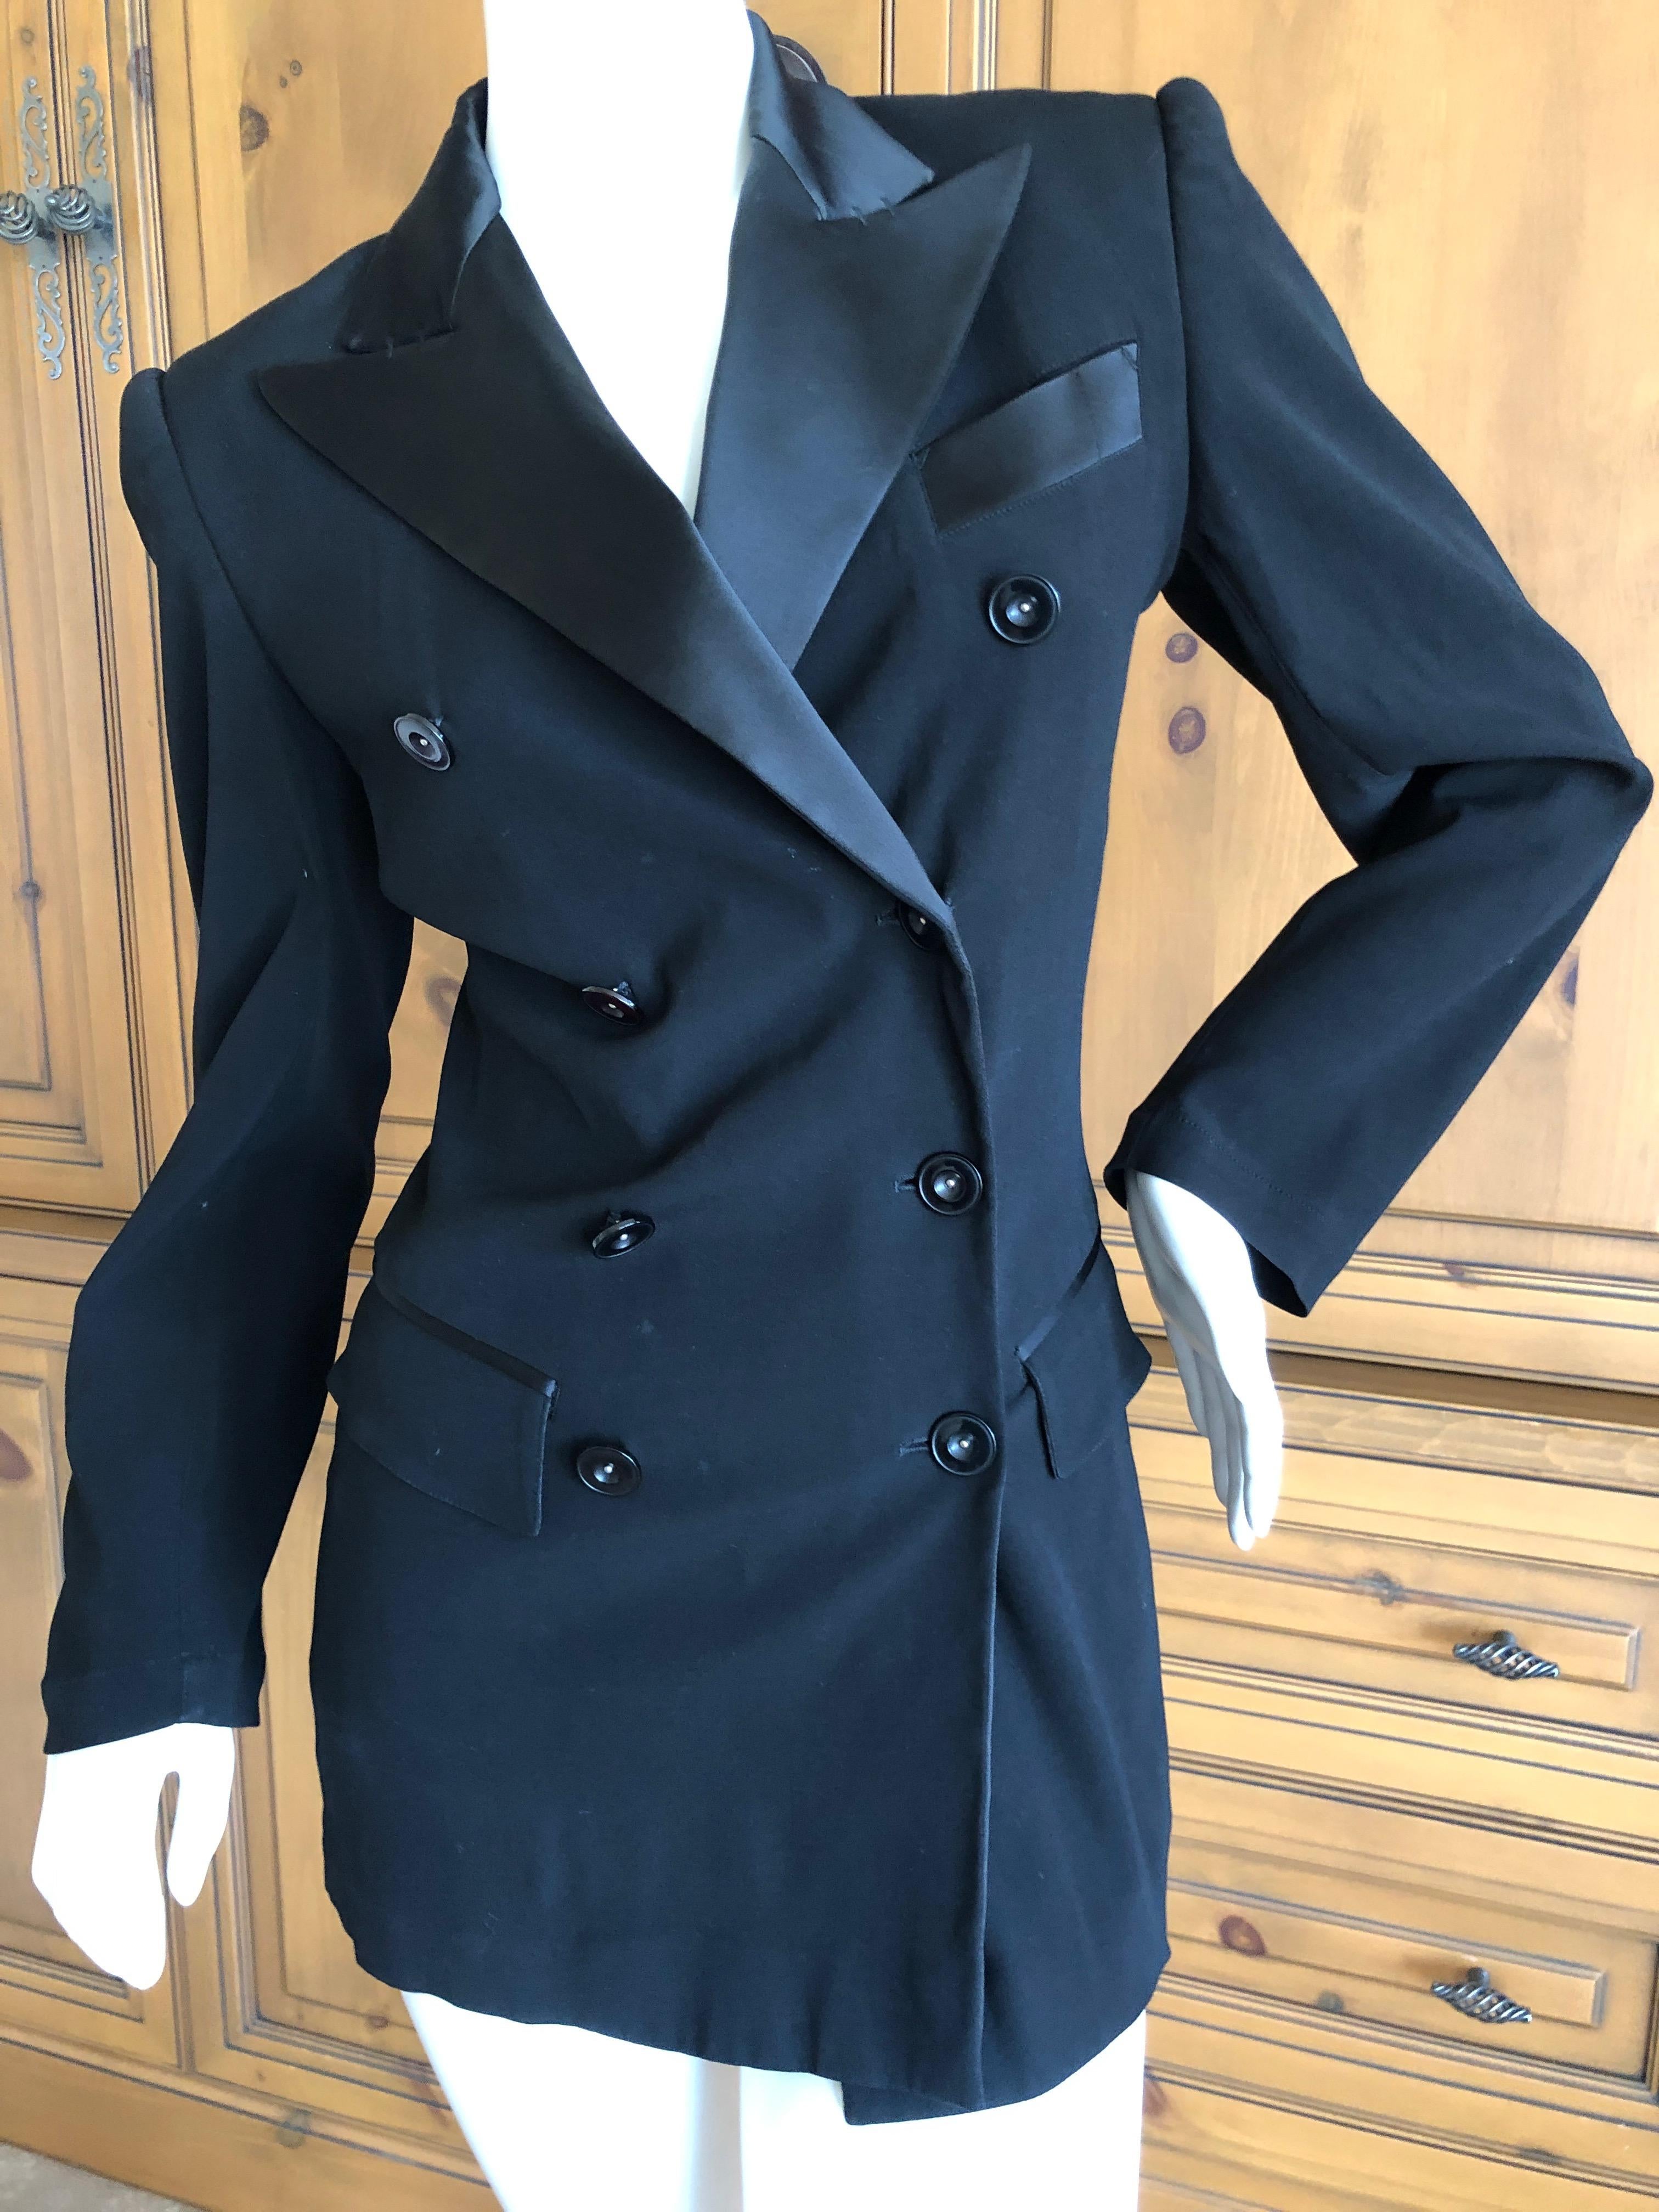 Jean Paul Gaultier Femme Vintage Satin Trimmed Double Breasted Tuxedo Jacket
Late eighties, this is a classic Gaultier Tuxedo
Size 40
Bust 35